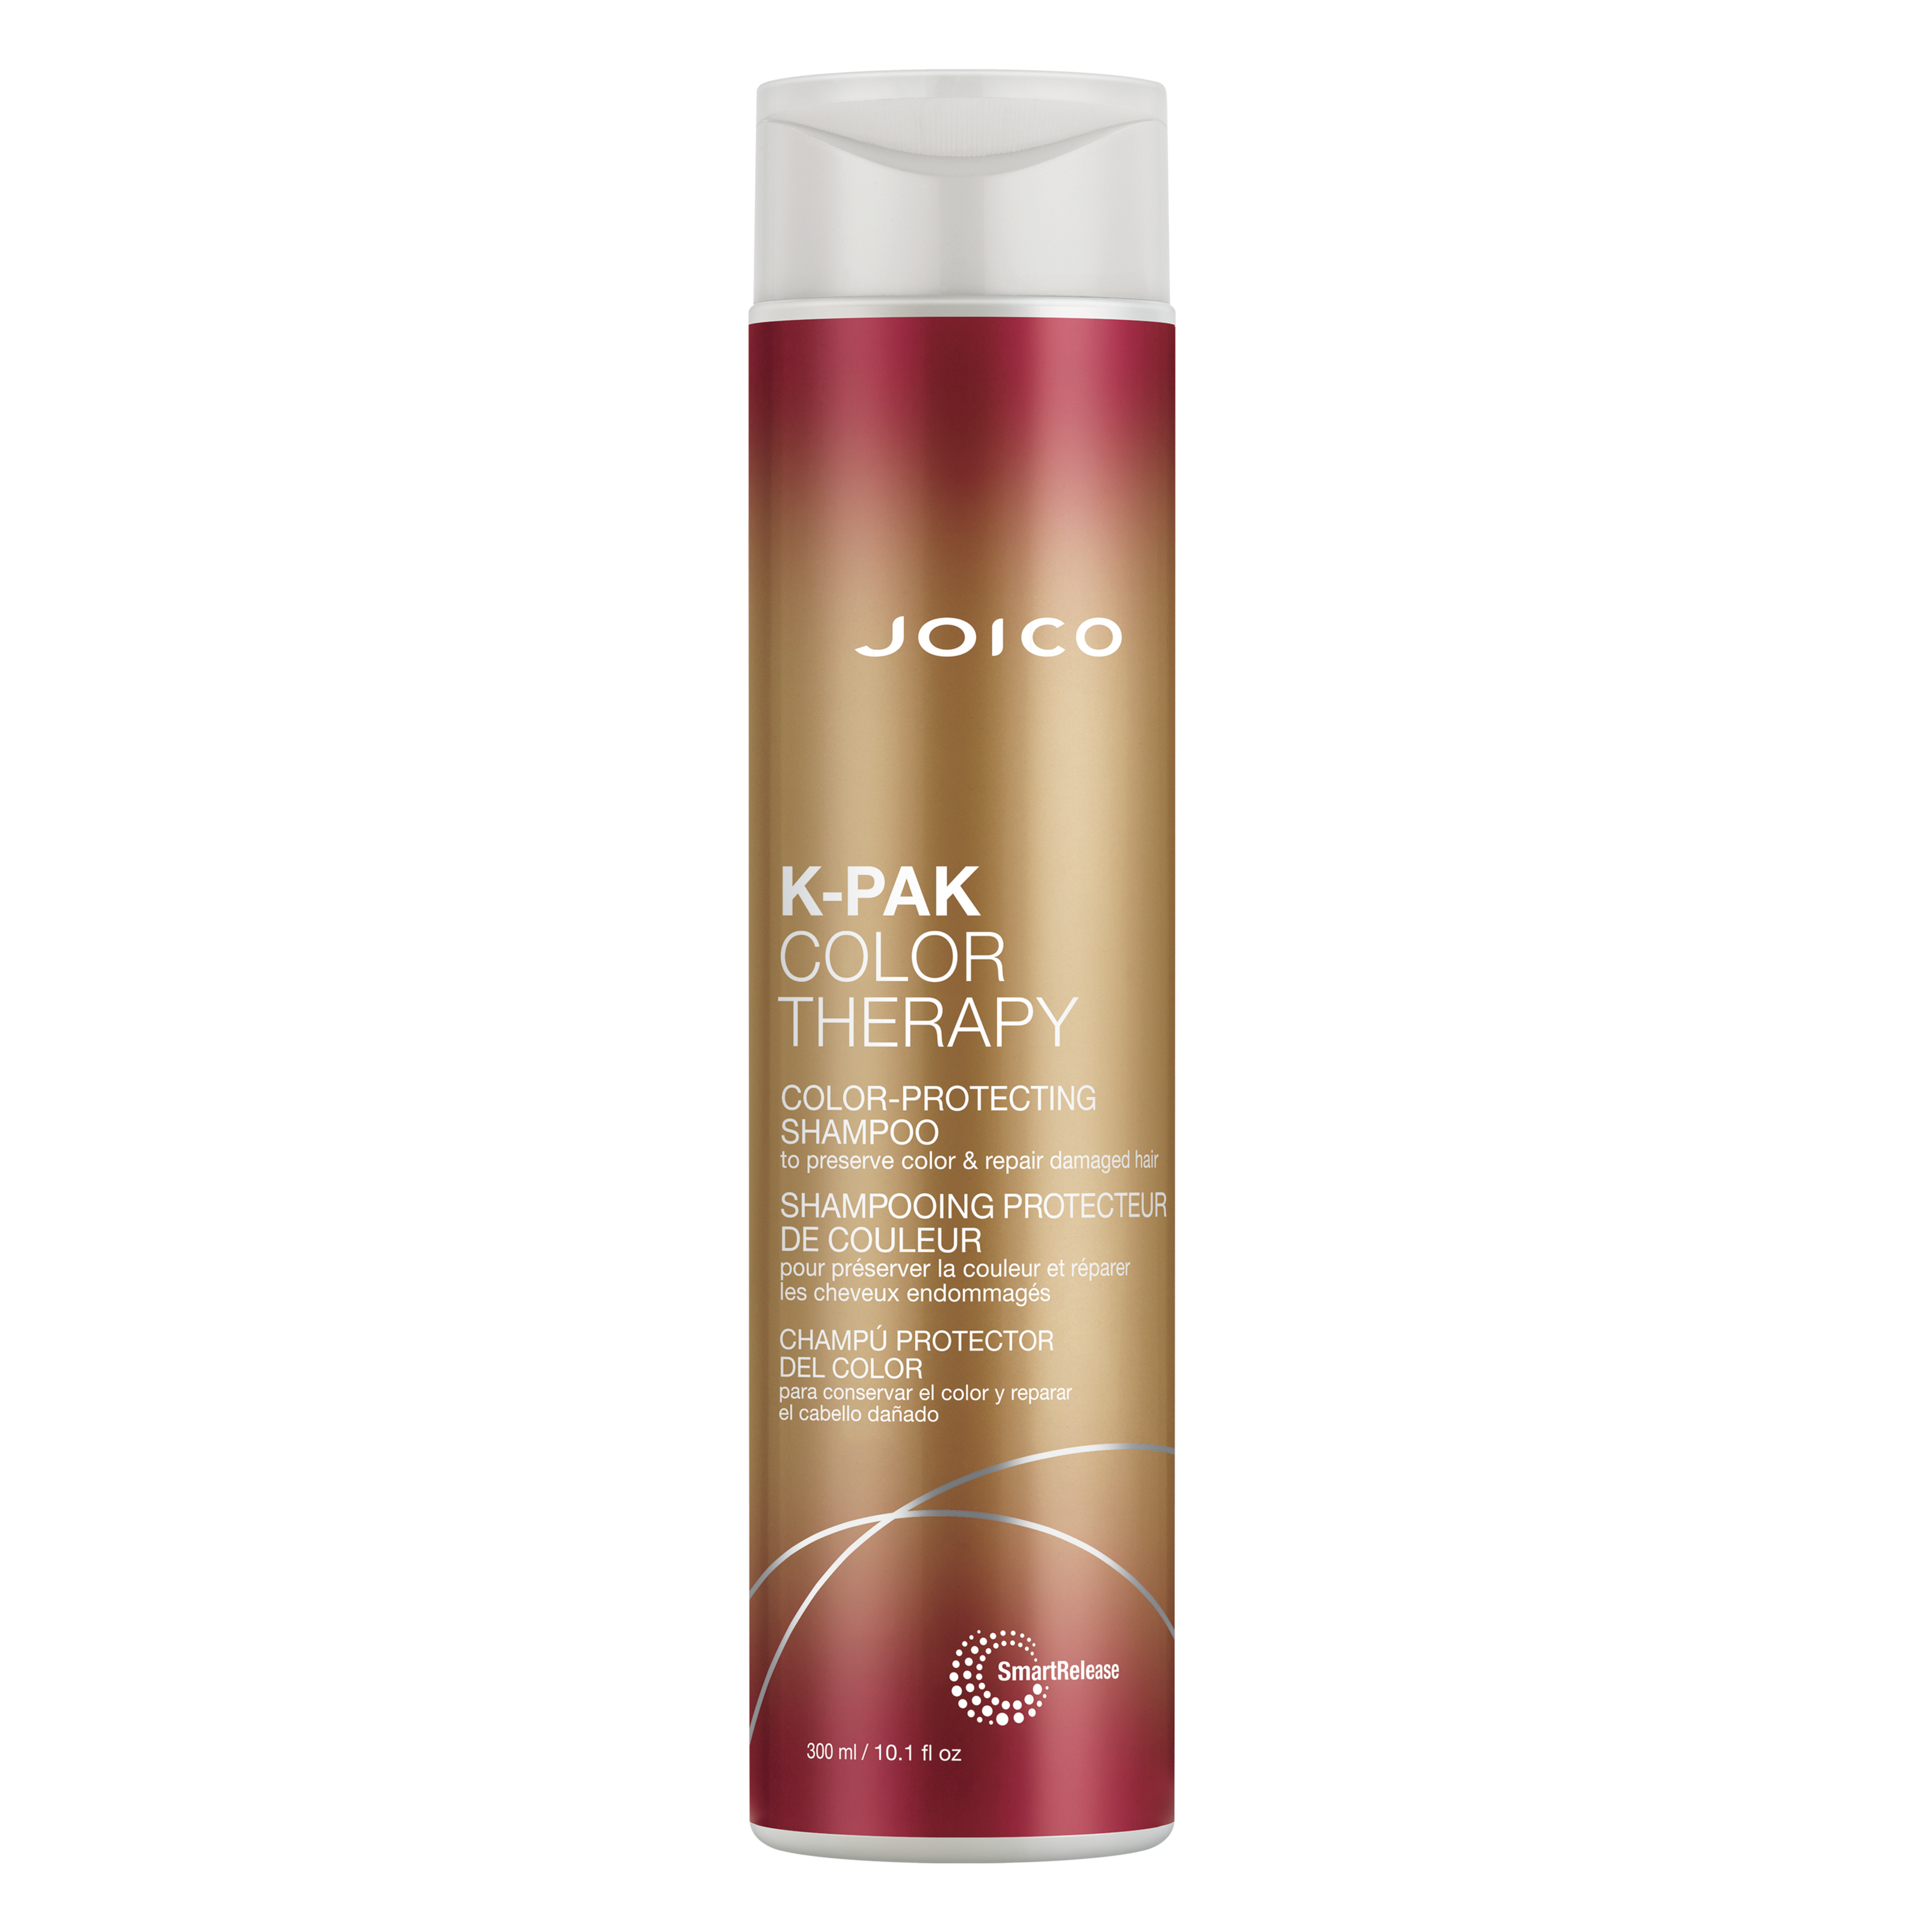 Läs mer om Joico K-pak Color Therapy Color-Protecting Shampoo 300 ml